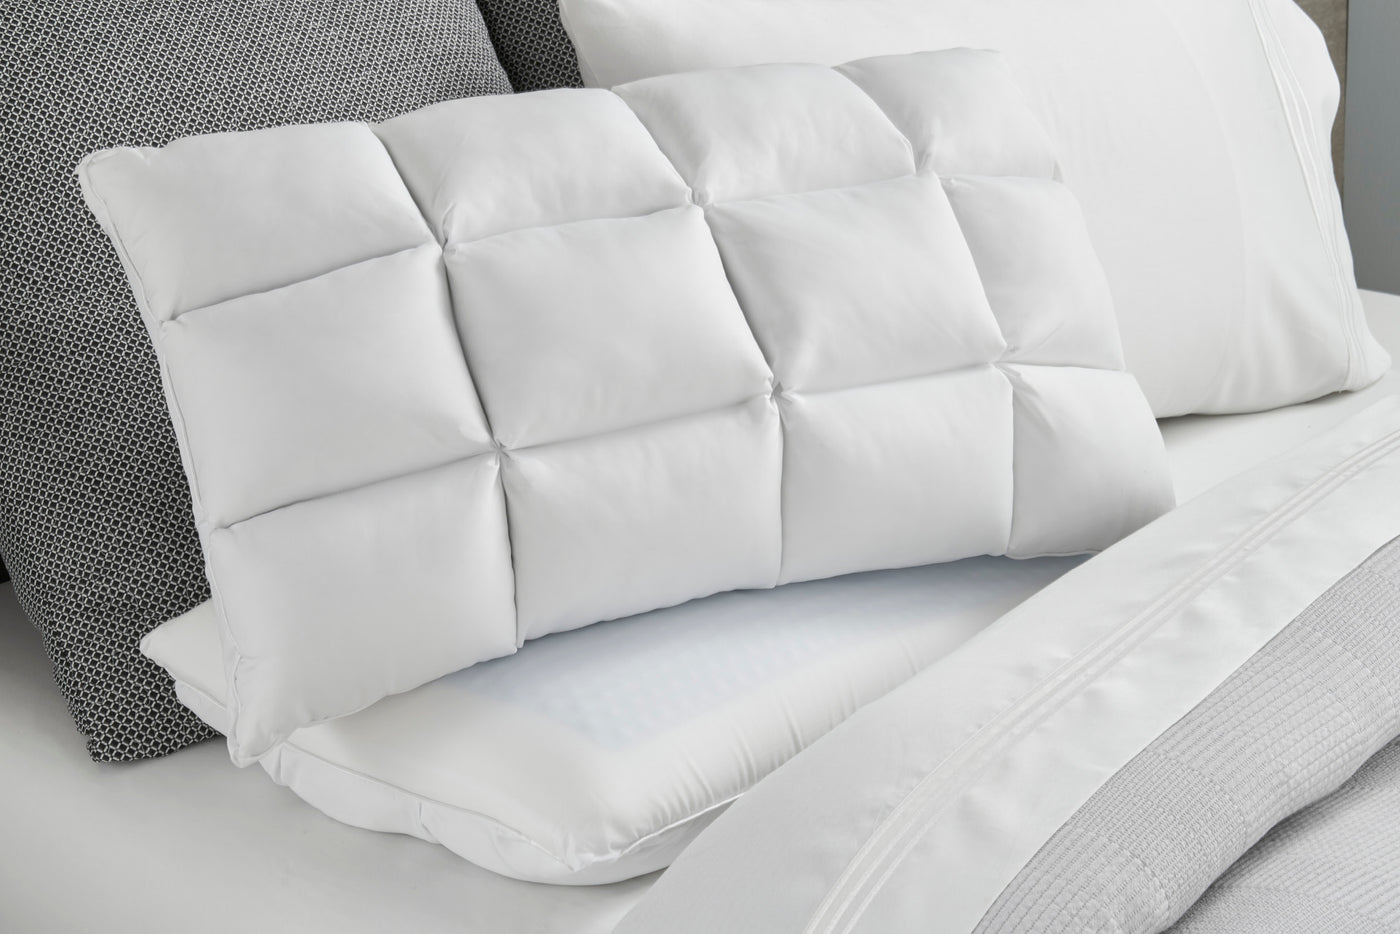 Image of a Cooling SoftCell® Chill Pillow on a gray and white bed with the SoftCell side facing forward